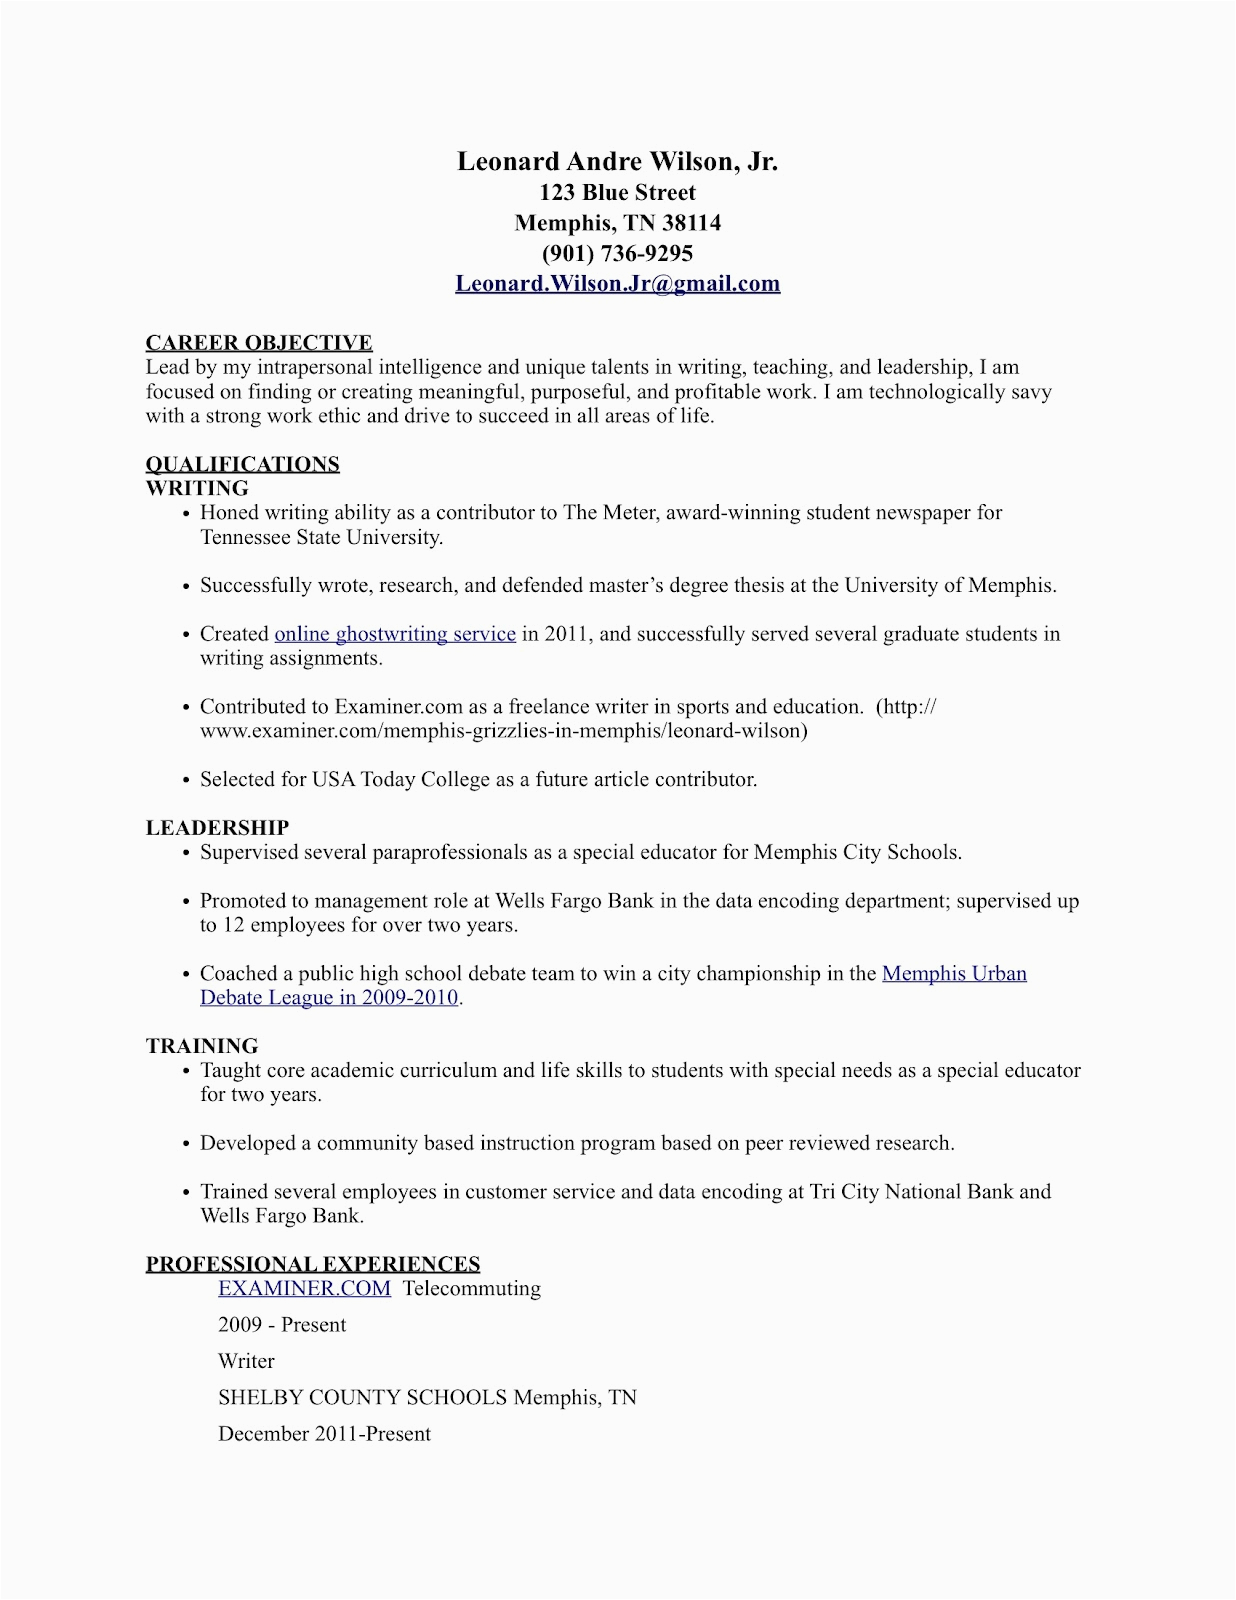 Sample Skills and Interests In Resume Following My Passion to Success Career tools Sample Resume Featuring